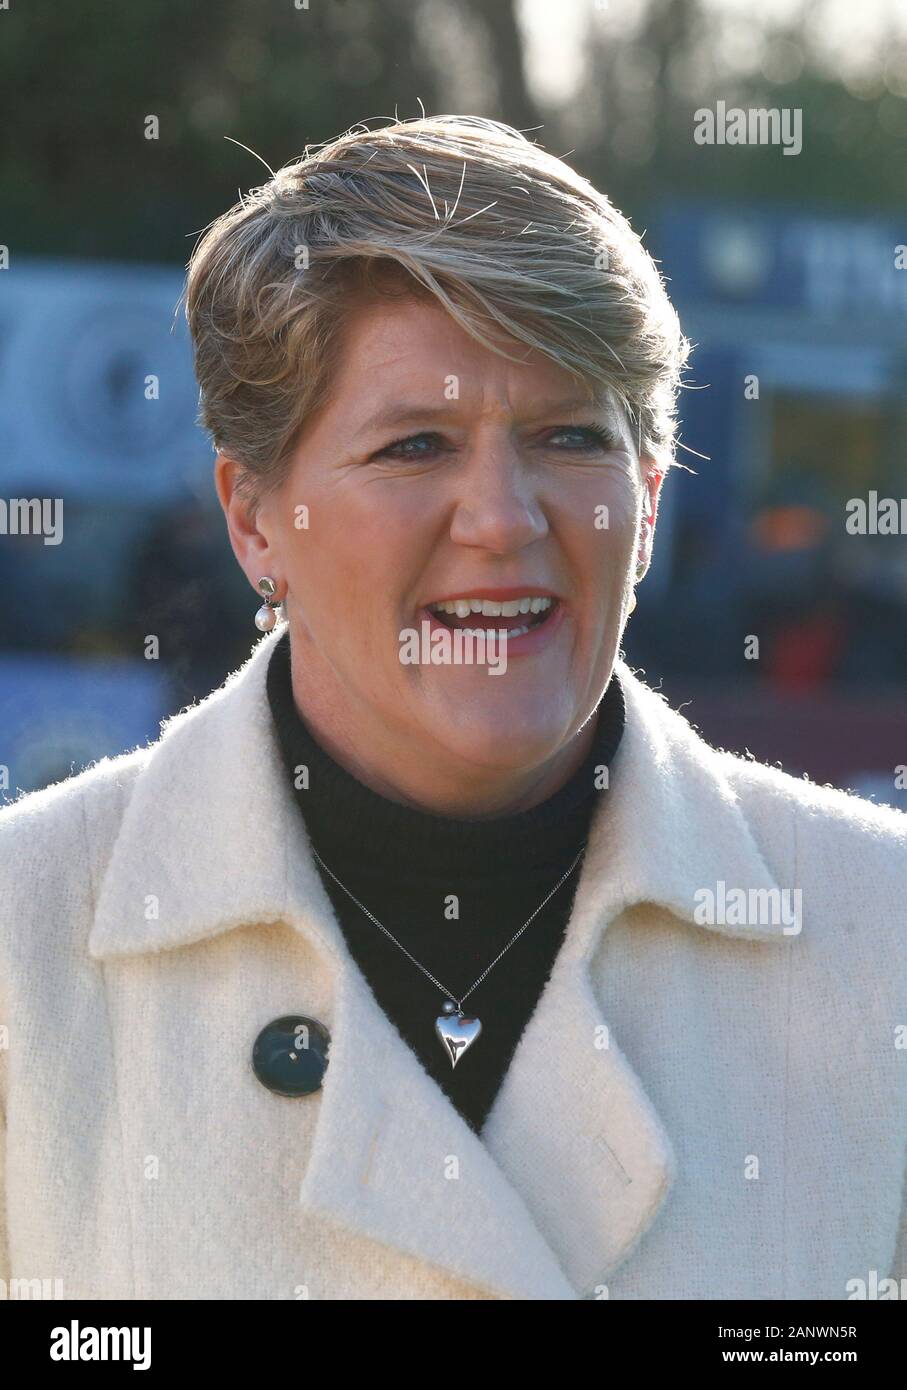 Clare Balding broadcasteduring Barclays Women's Super League match between Arsenal Women and Chelsea Women at Meadow Park Stadium on January 19, 2020 in Borehamwood, England (Photo by AFS/Espa-Images) Stock Photo